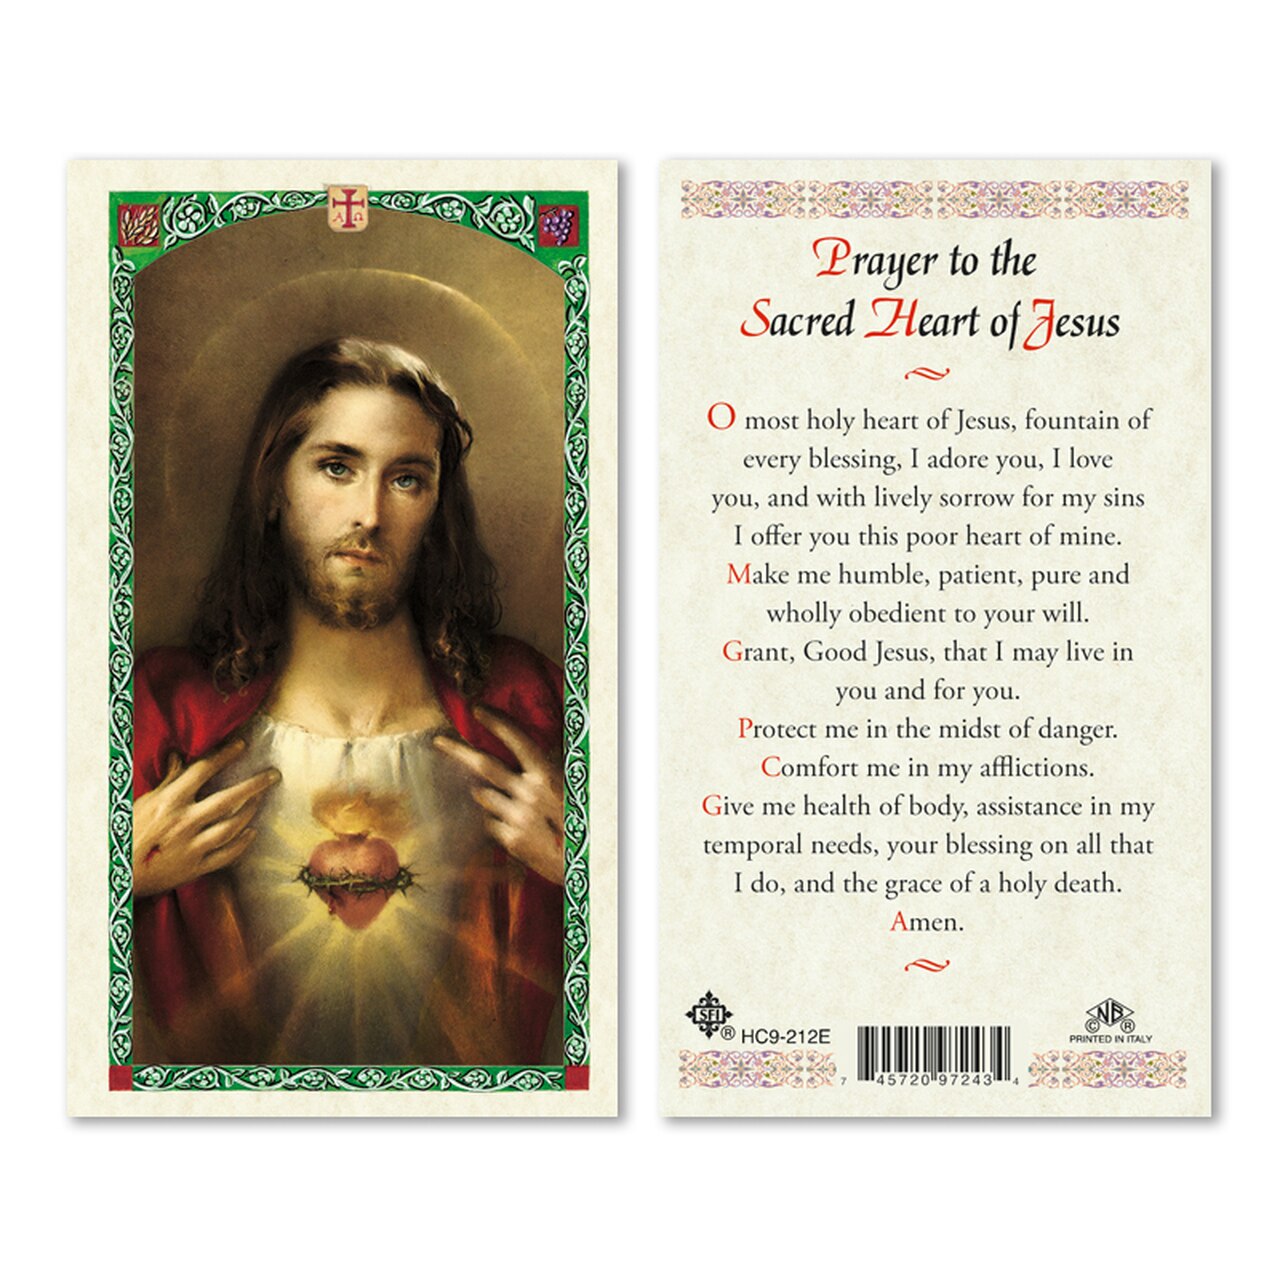 Prayer to the Sacred Heart of Jesus The Catholic Gift Store